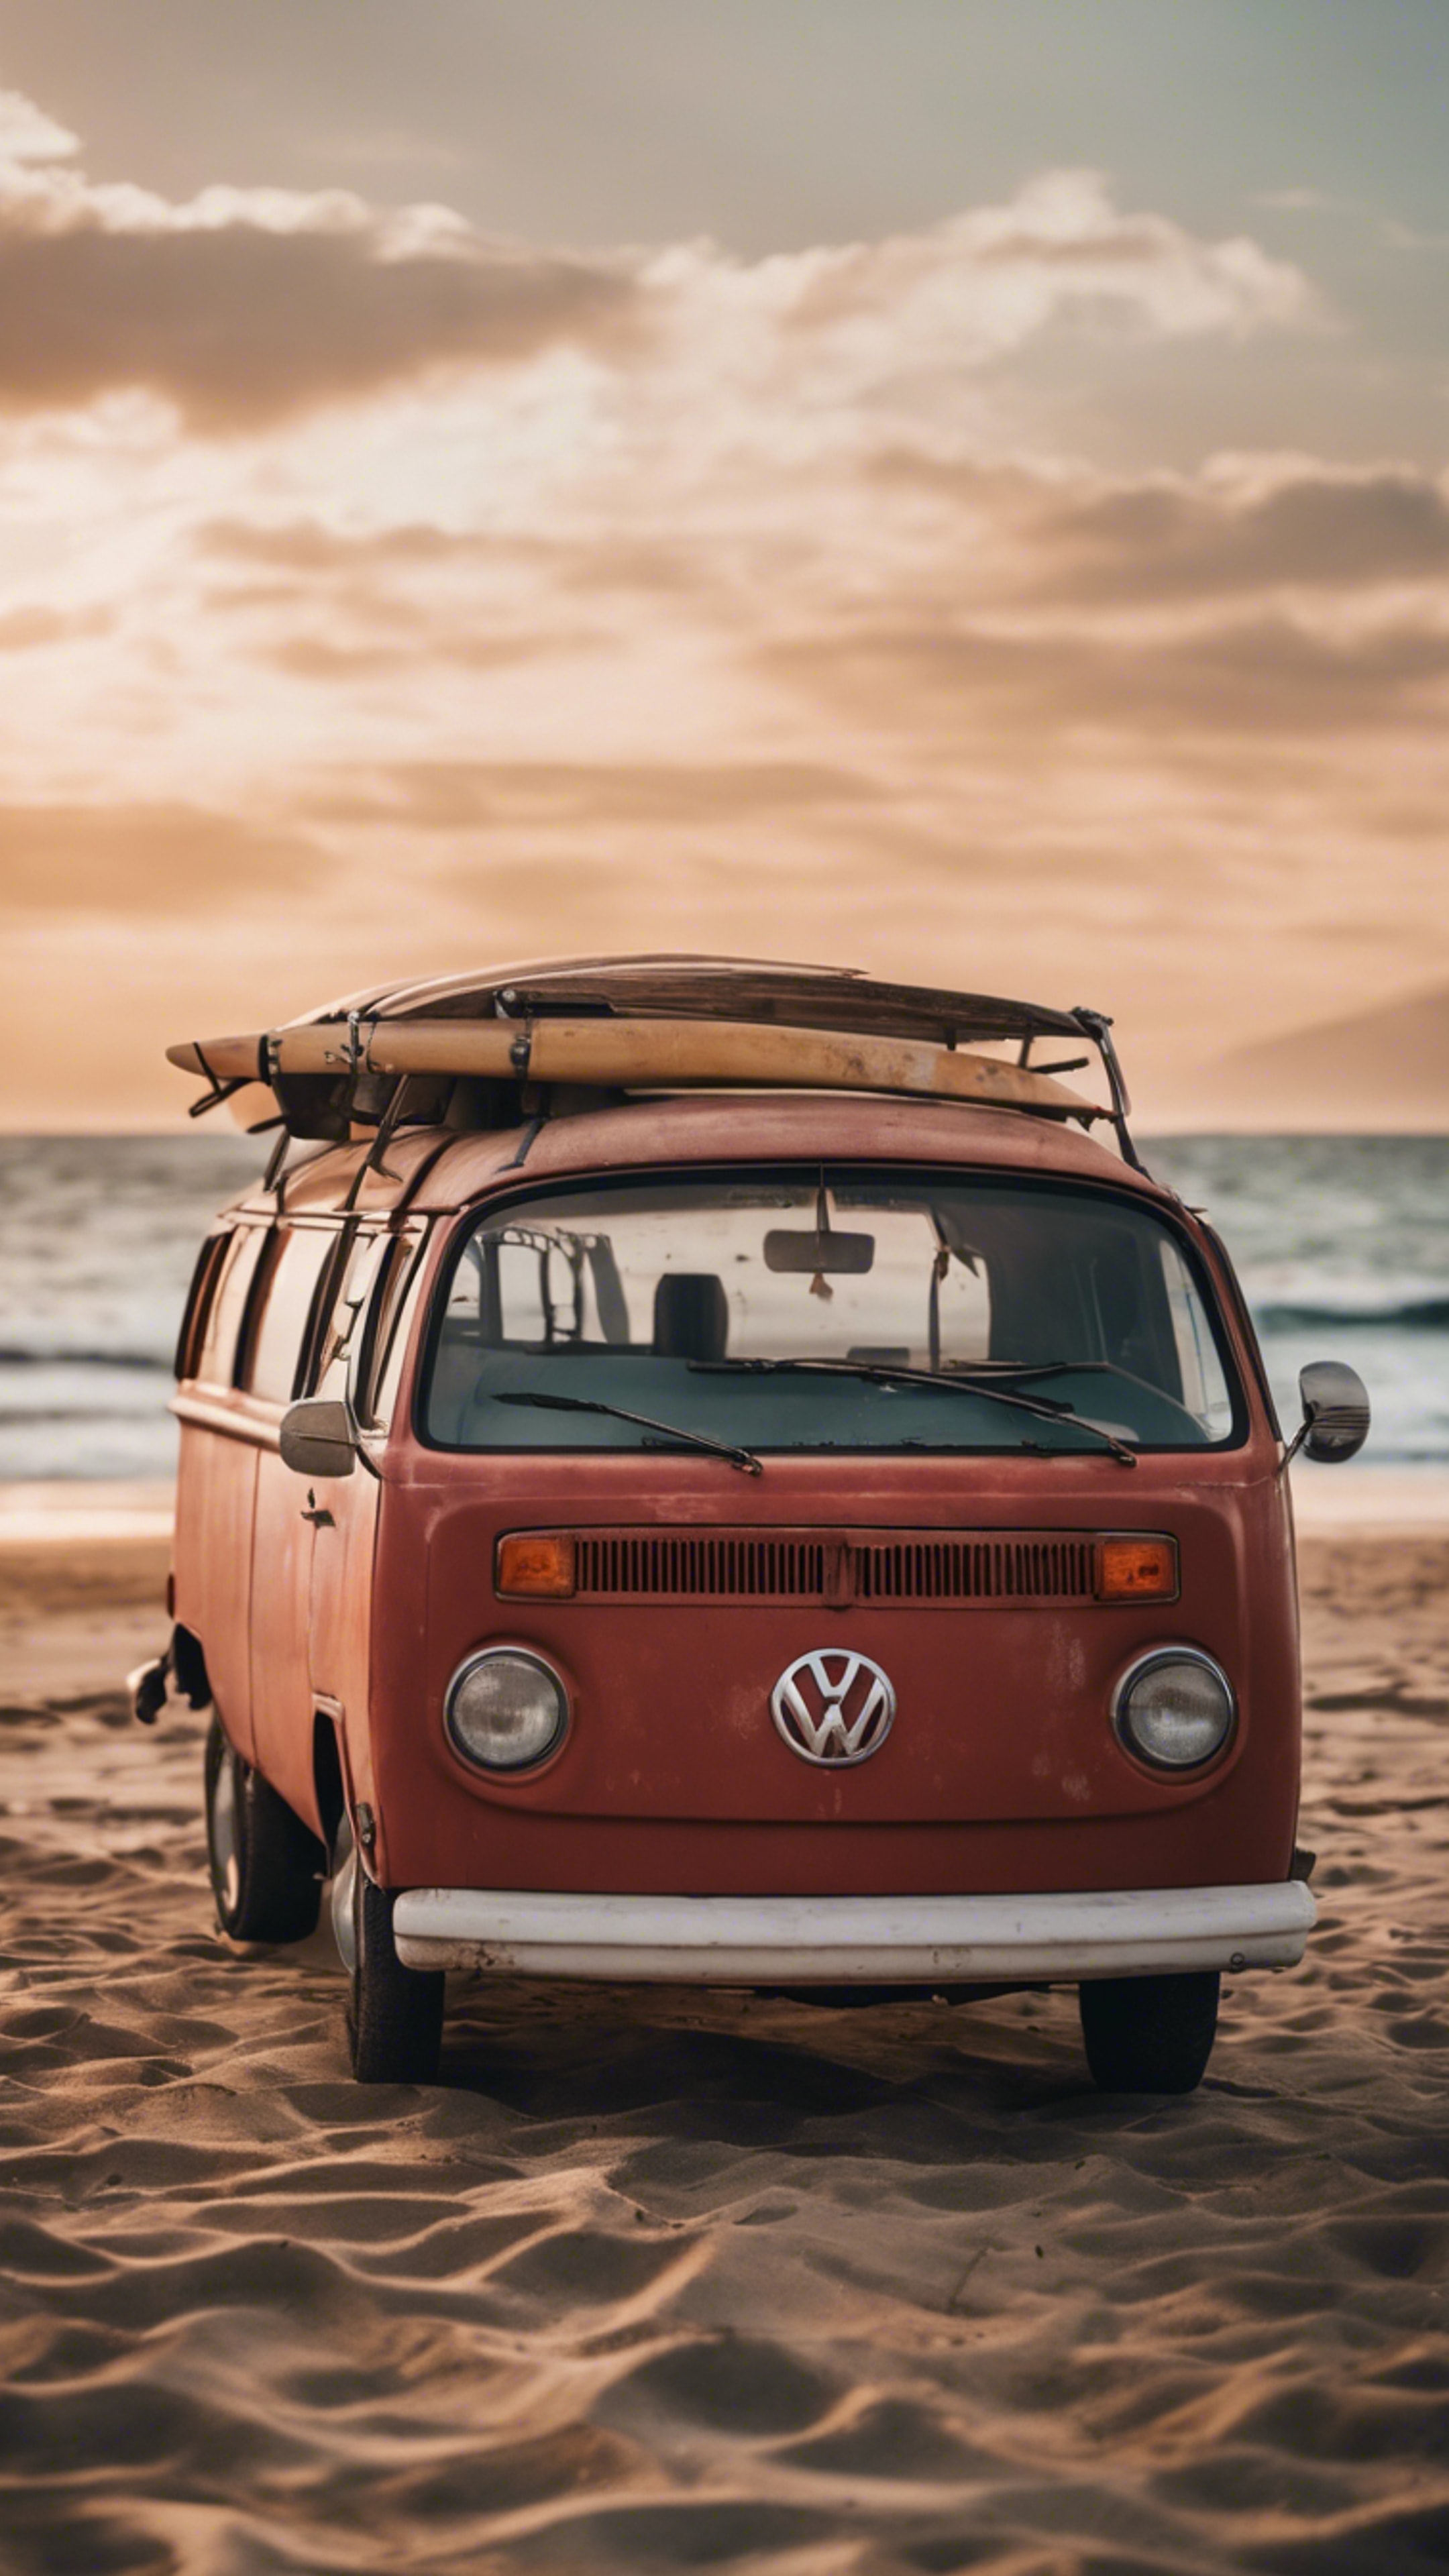 An old, rusted red Volkswagen van parked at a beach with the sunset in the backdrop, surfboards leaning against it. ورق الجدران[f96813b3e584499cadbf]